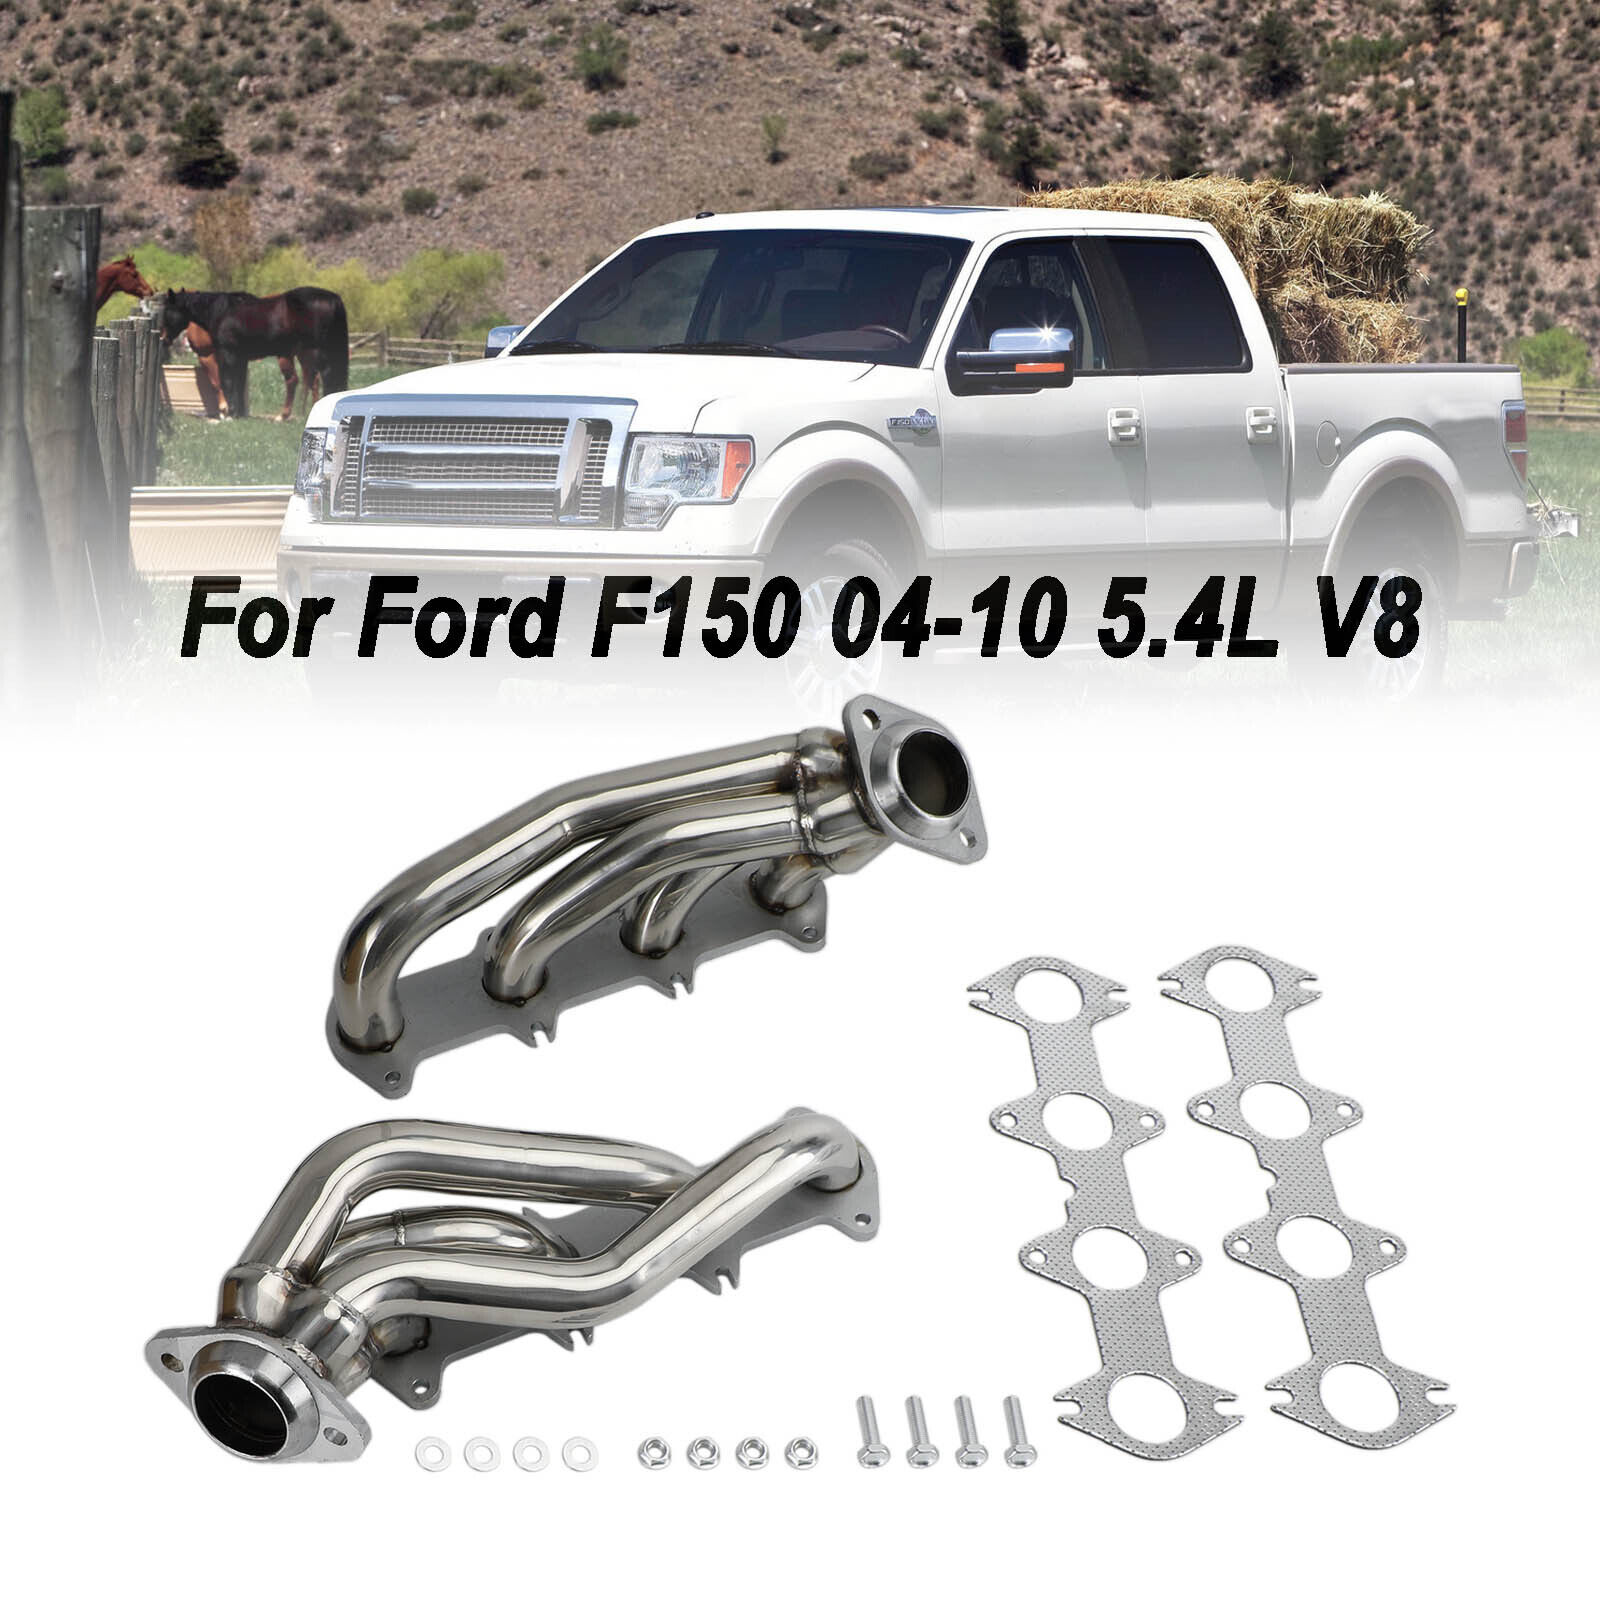 NEW 1× Stainless Shorty Exhaust Header Kit Fits for Ford F150 5.4L V8 2004-2010